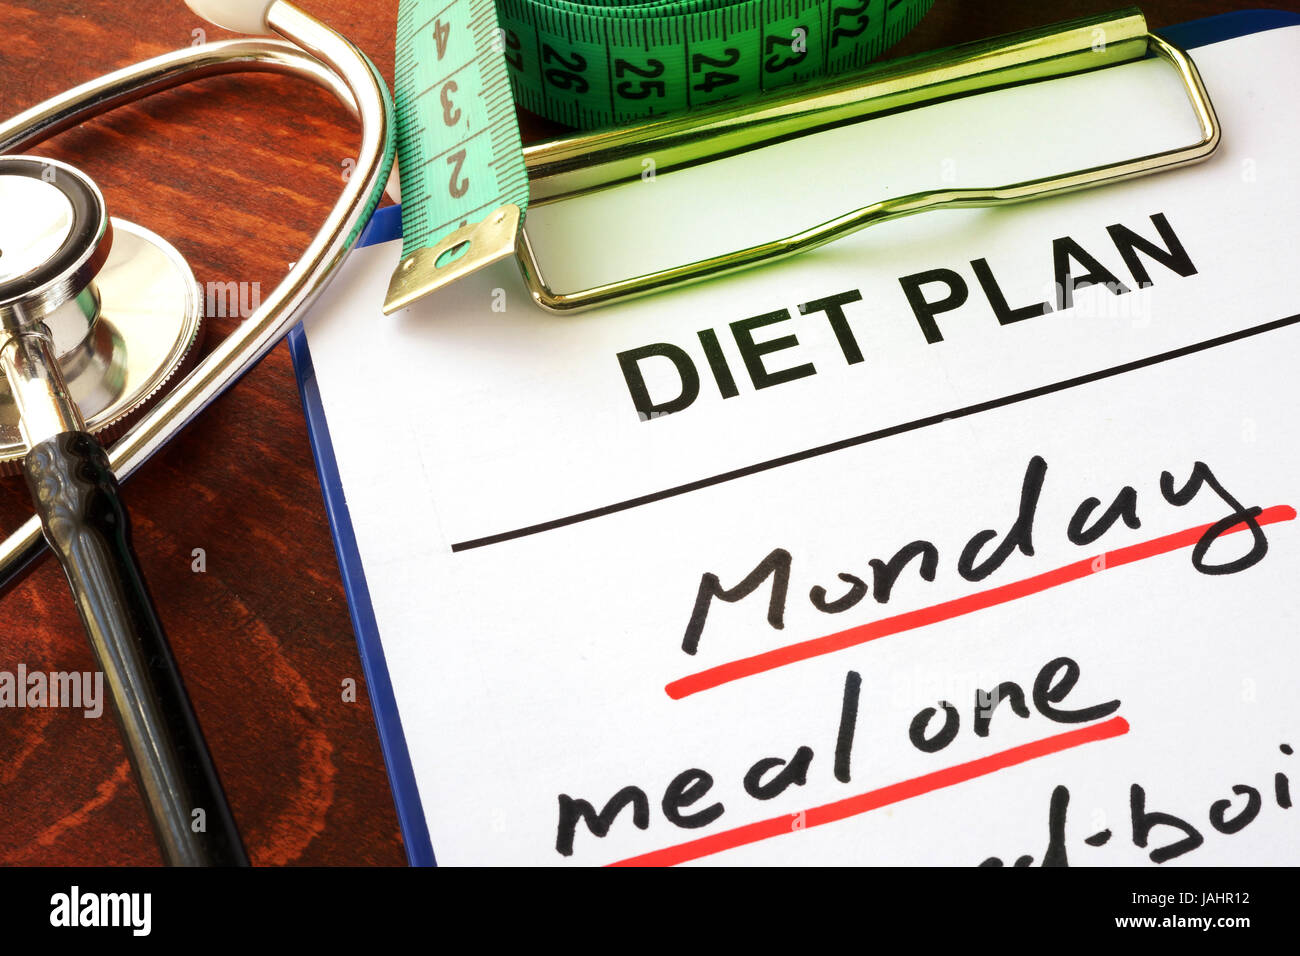 Stethoscope and diet plan. Diabetes diet concept. Stock Photo